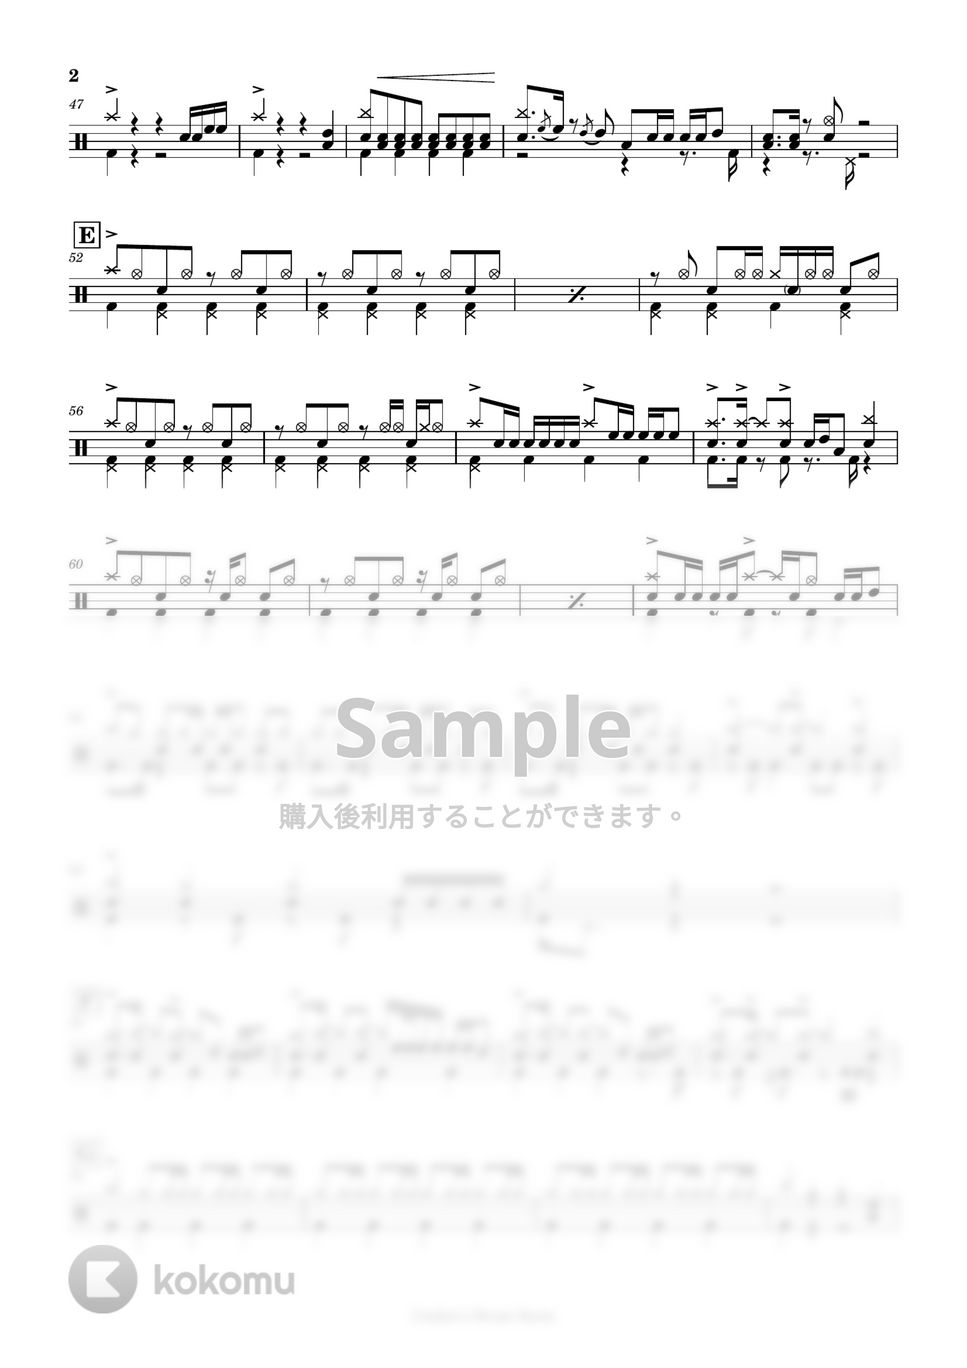 Roselia - This game by Cookie's Drum Score